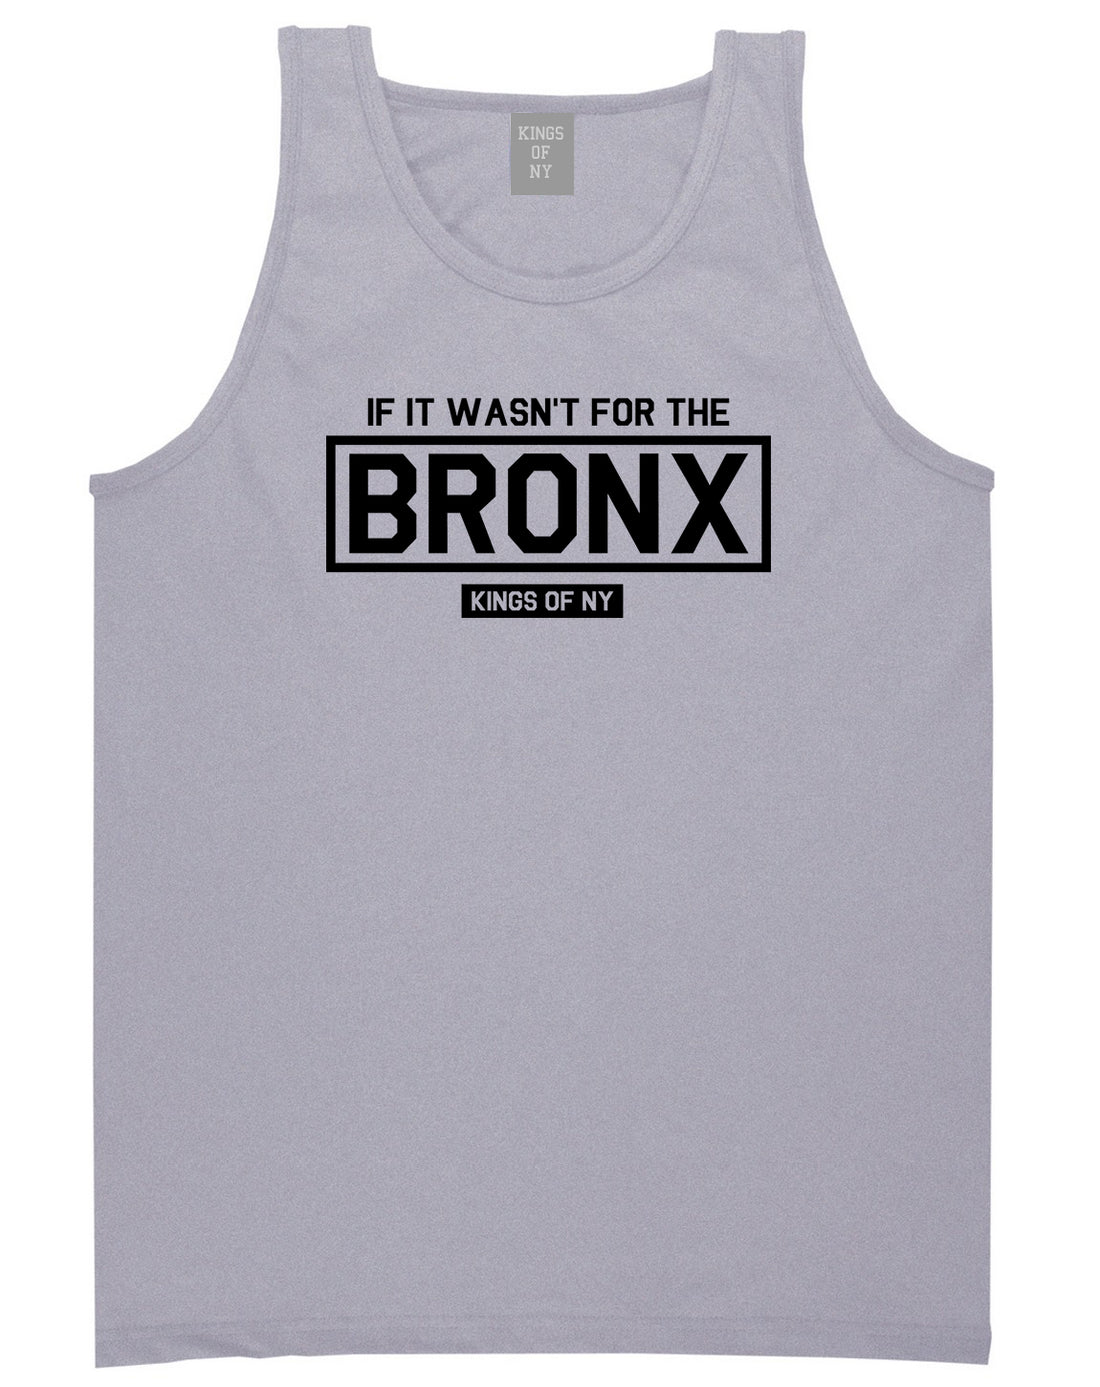 If It Wasnt For The Bronx Mens Tank Top Shirt Grey by Kings Of NY